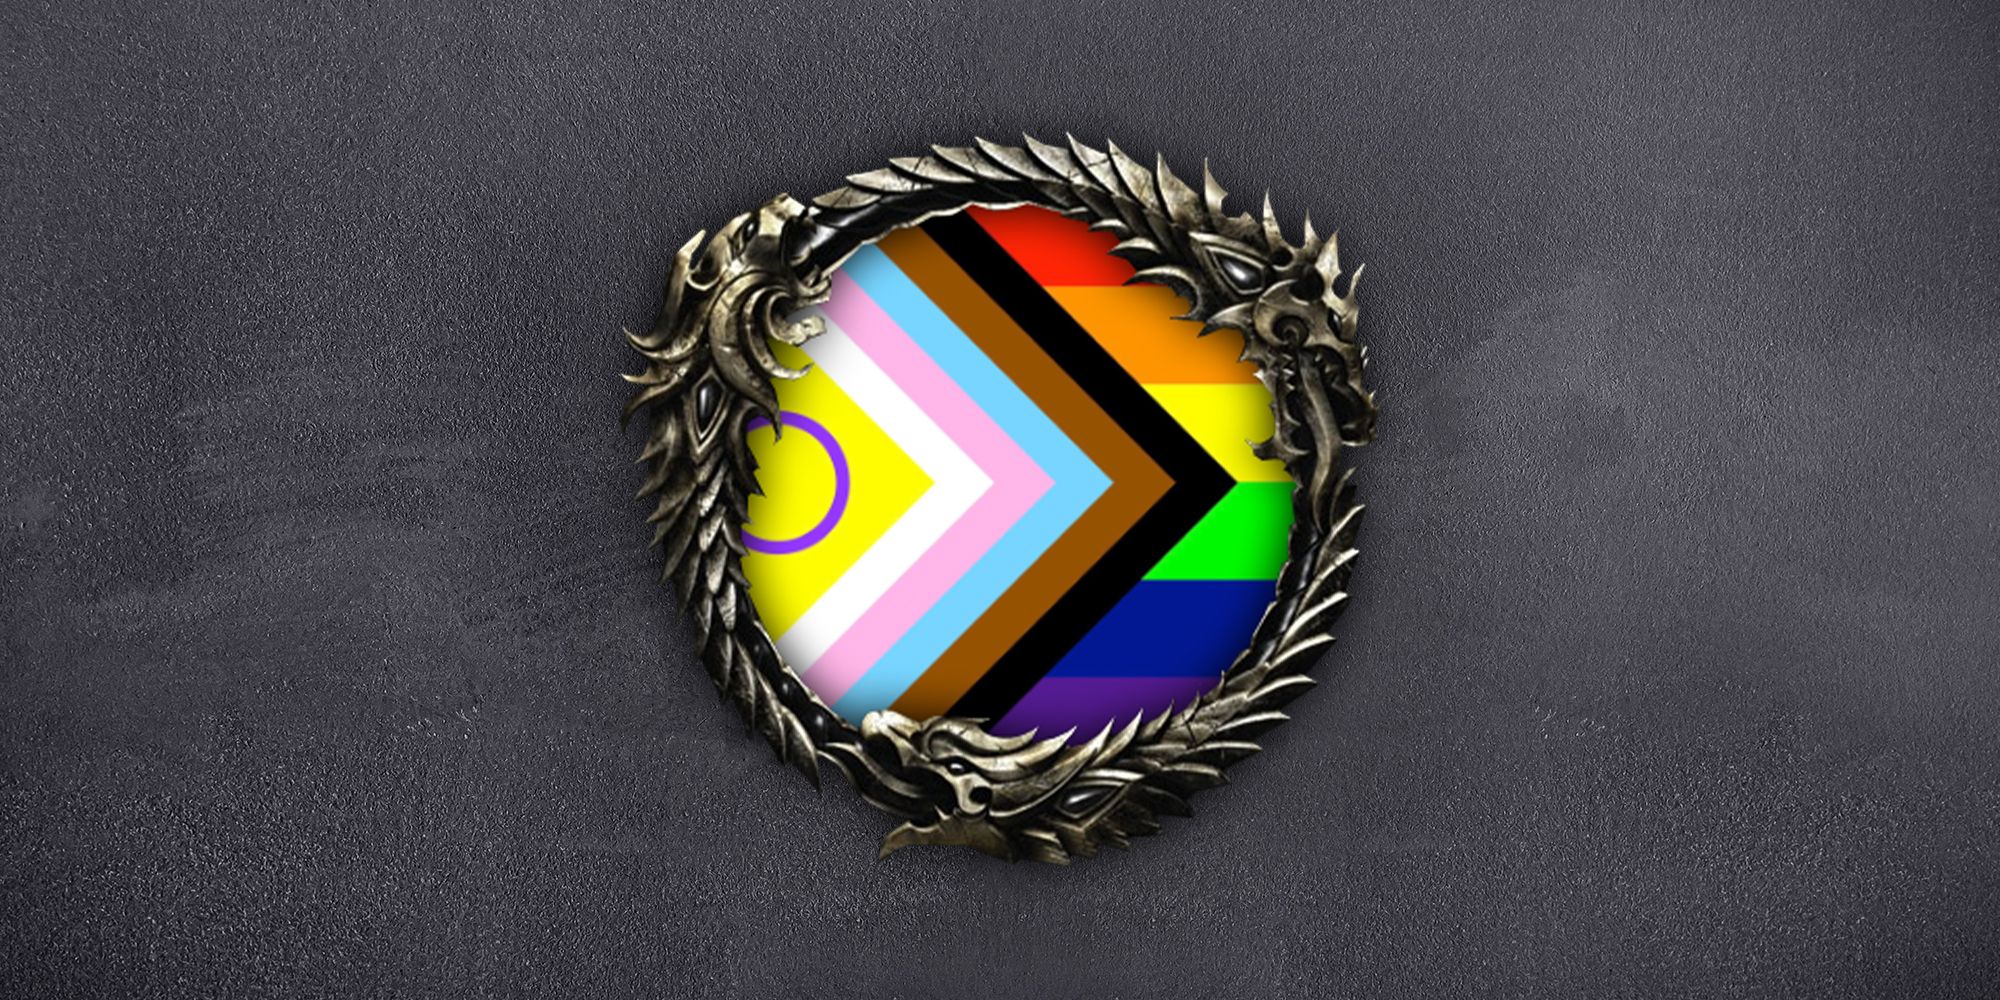 The Elder Scrolls Online logo with the LGBTQ+ Pride flag in the middle over a grey background